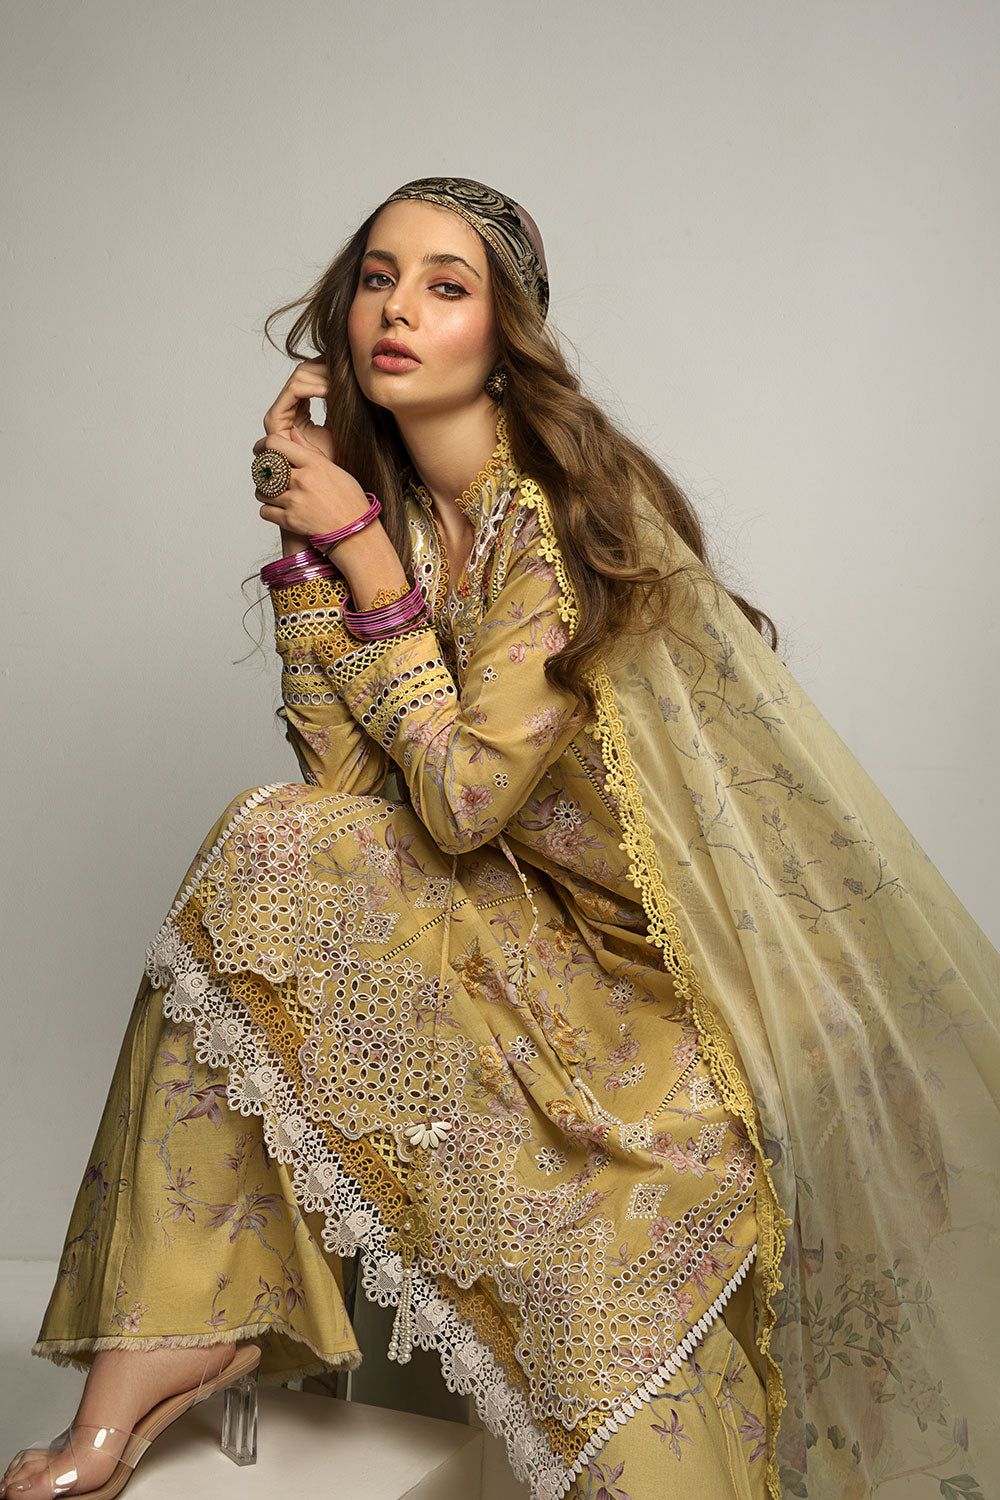 Buy Now, D#4B - Sobia Nazir Vital 2023 - Vol. 2 - Shahana Collection UK  - Wedding and Bridal Party Dresses - Sobia Nazir in UK - Summer Lawn 2023